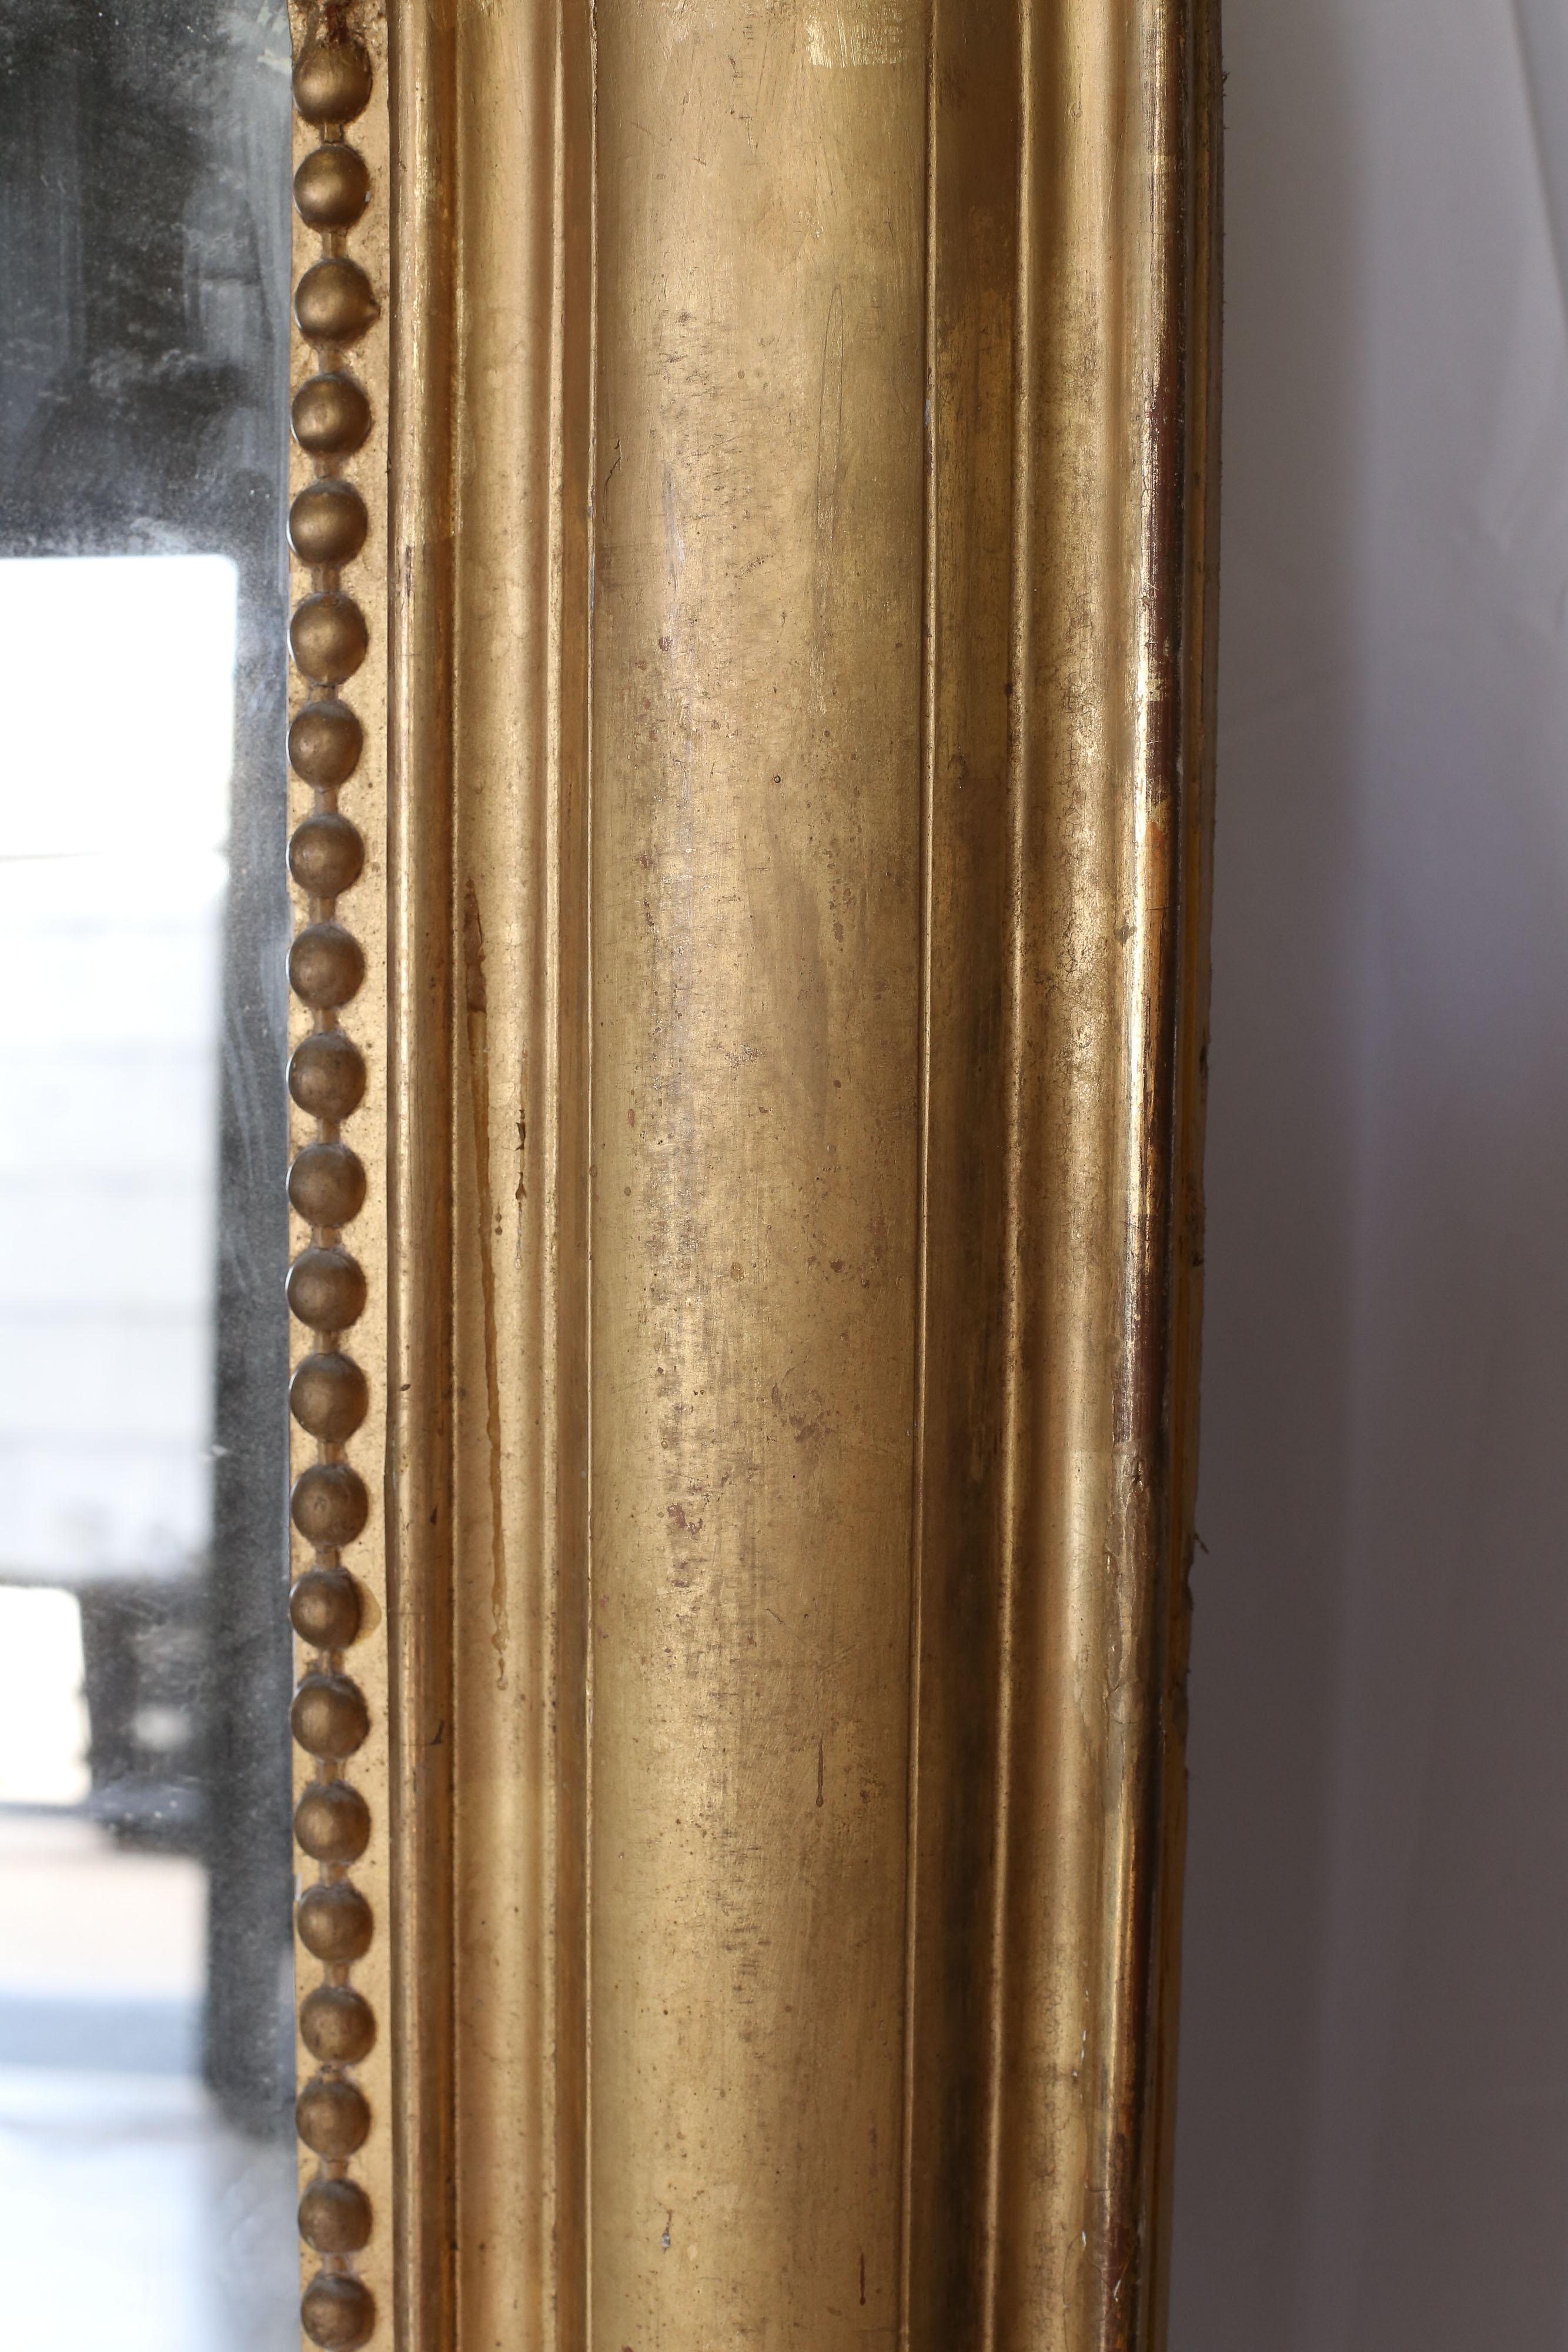 Large 20th century Louis Philippe style mirror. It appears that this mirror was originally made in a brown finish and has had a gilt/gold finish applied to the exterior. The structure is solid but it was not represented correctly upon purchase.